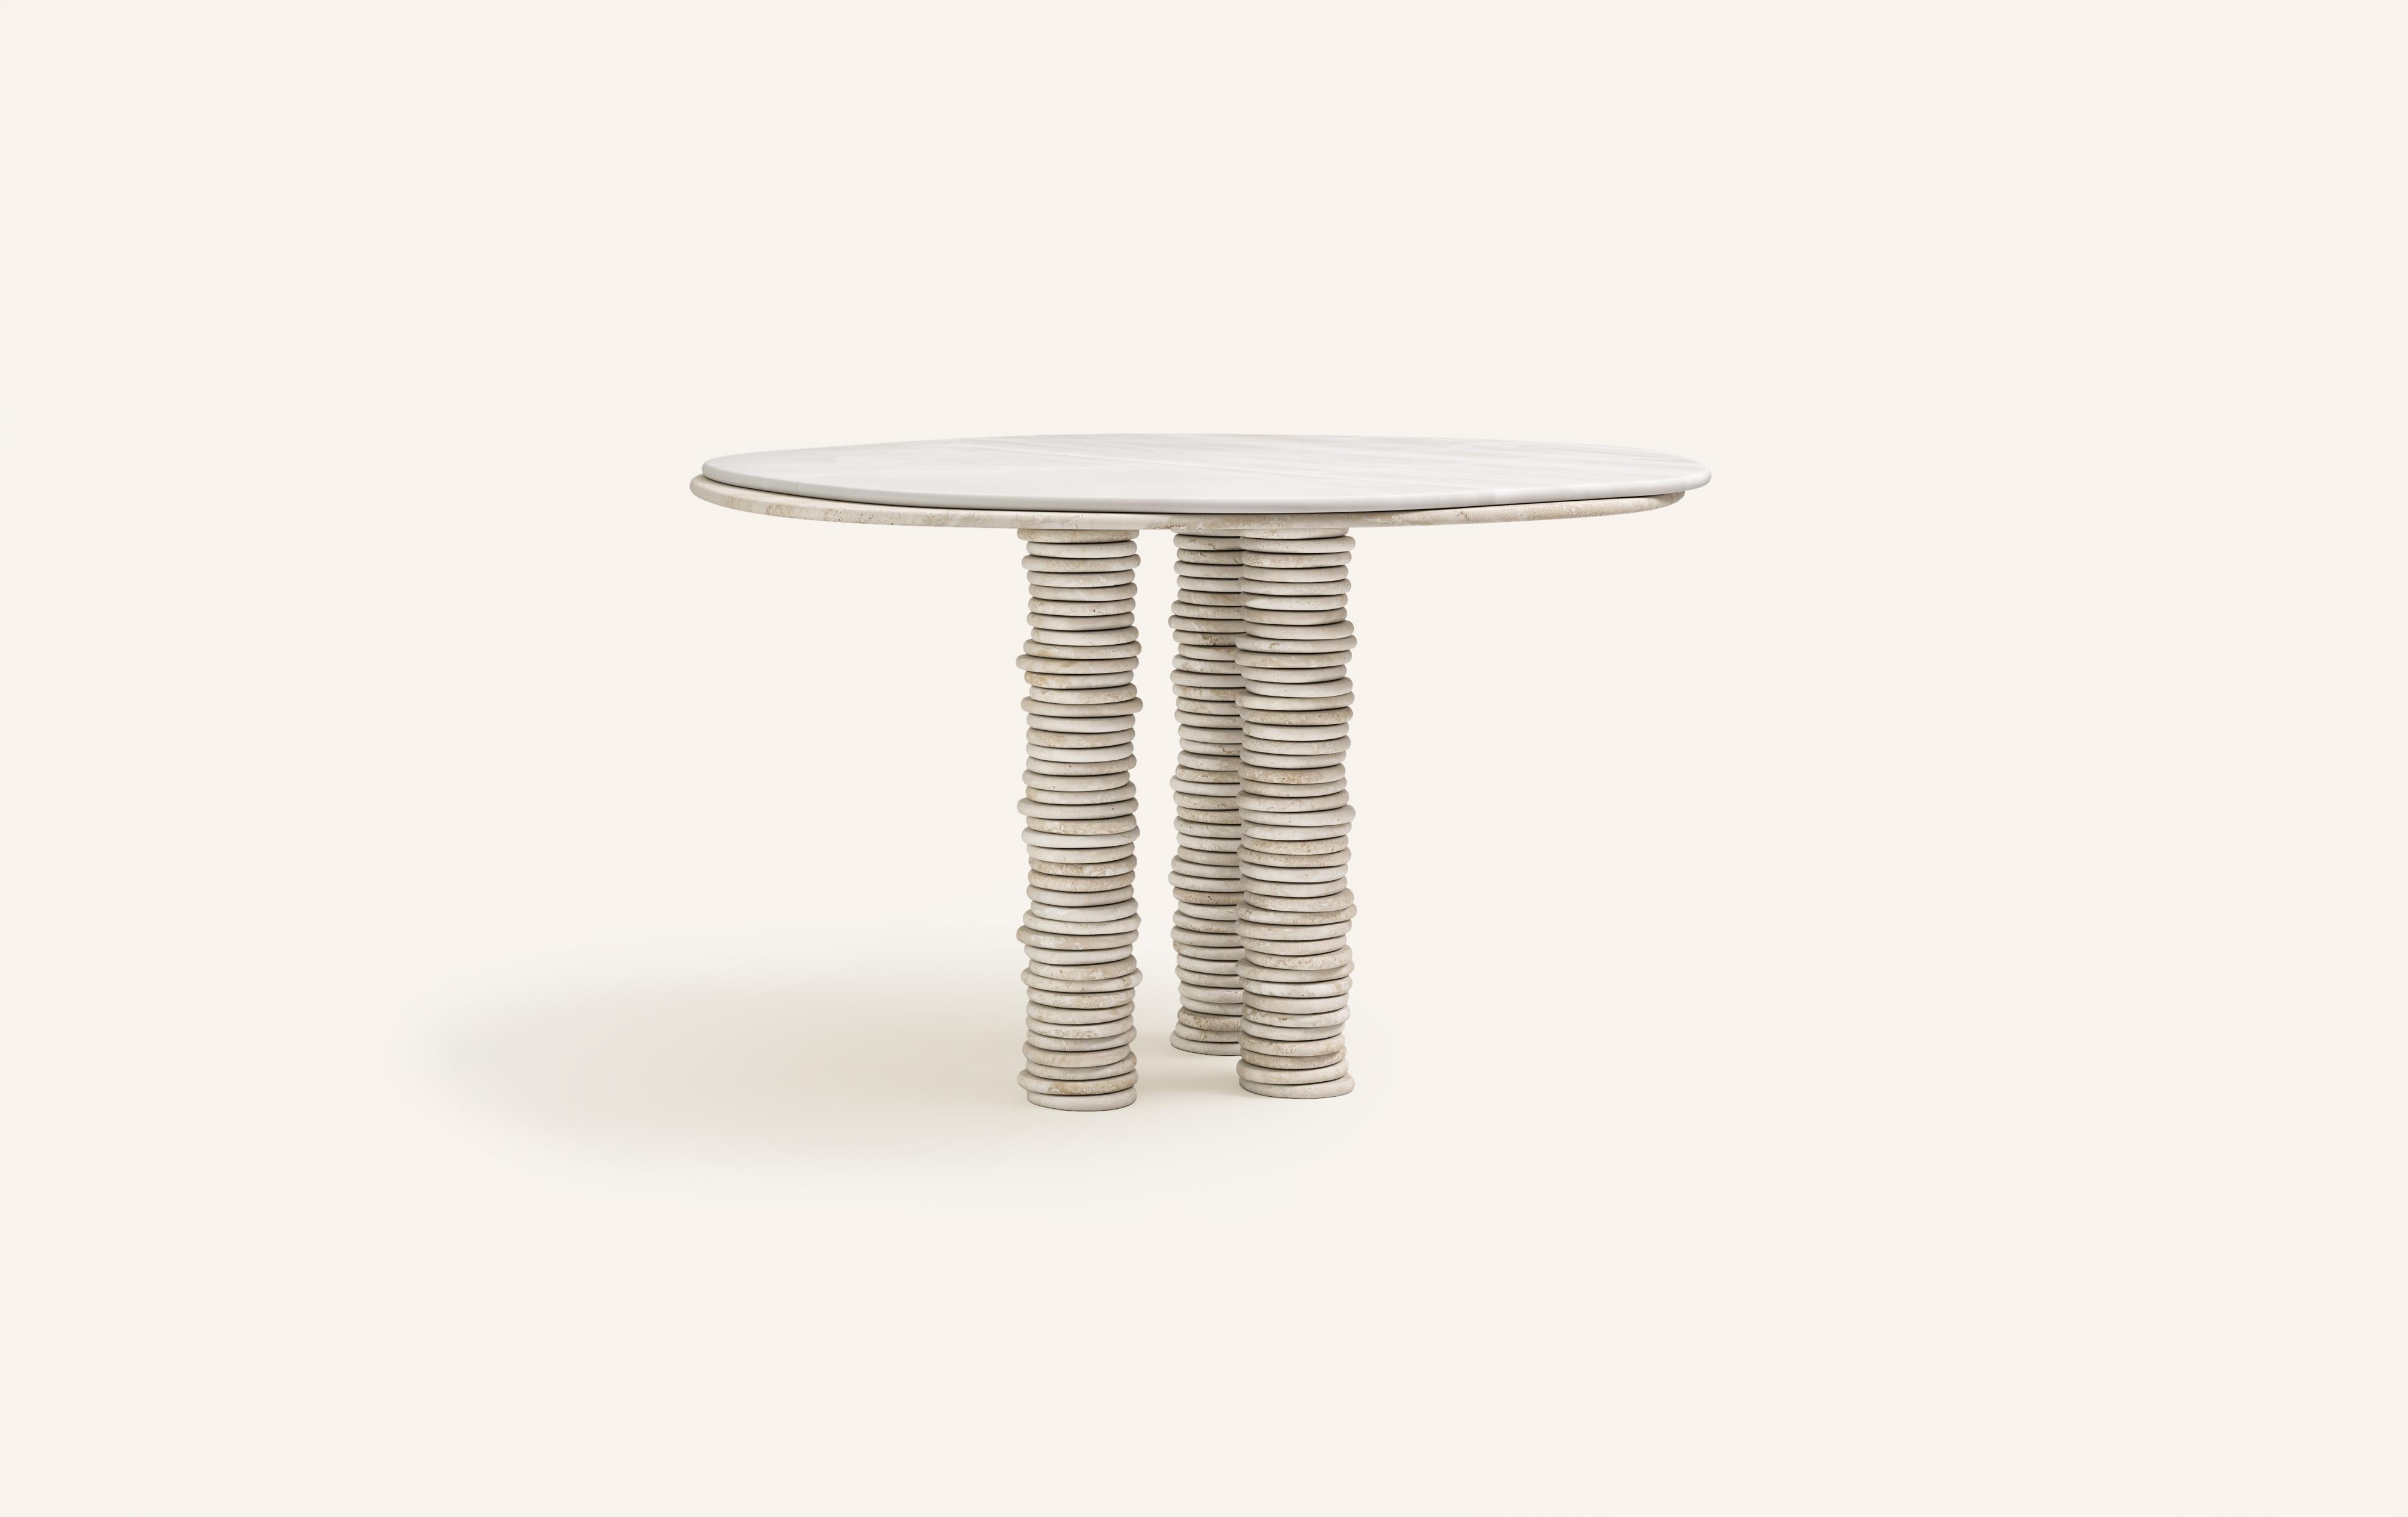 'ONDA', ITALIAN FOR 'WAVE', HAS INSPIRED A FREEFORM ORGANIC BODY, HEROING A COMPLEX AND TEXTURED COLLECTION. COMPRISING SIDE TABLES FOR LAYERING, COFFEE TABLES AND DINING TABLES.

DIMENSIONS:
54”L x 54”W x 29-3/4”H: 
- 1.5